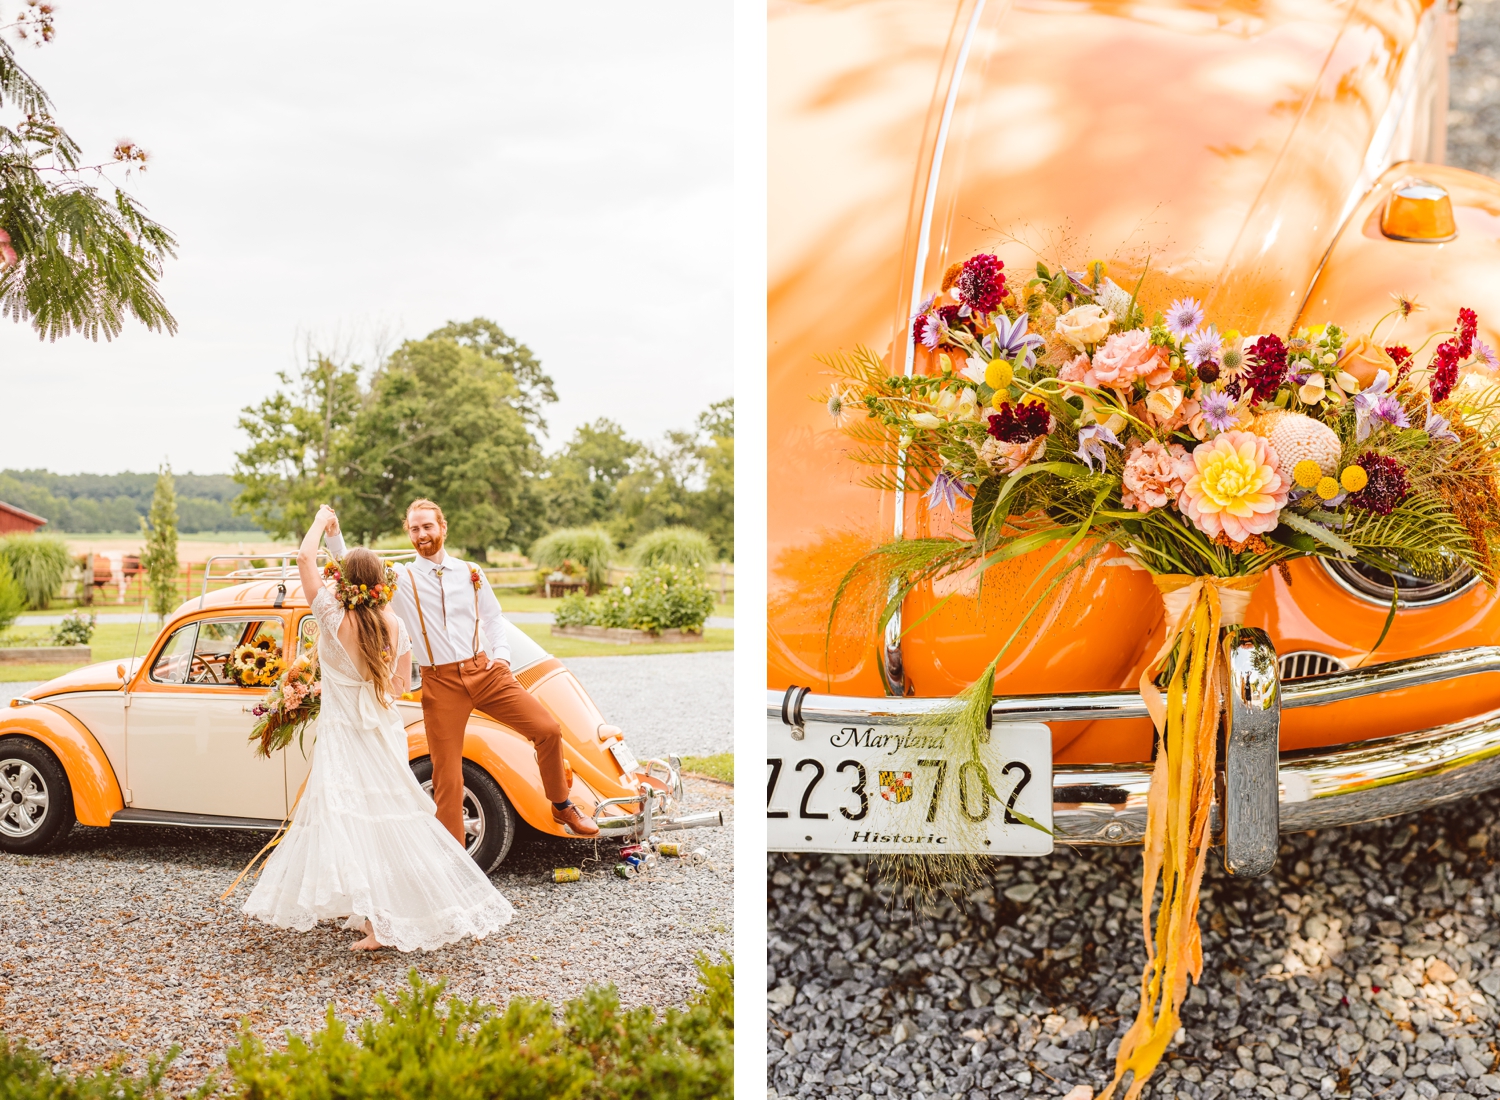 Groom twirling bride in front of VW bug | hand-tied bouquet sitting on VW bug | Brooke Michelle Photography